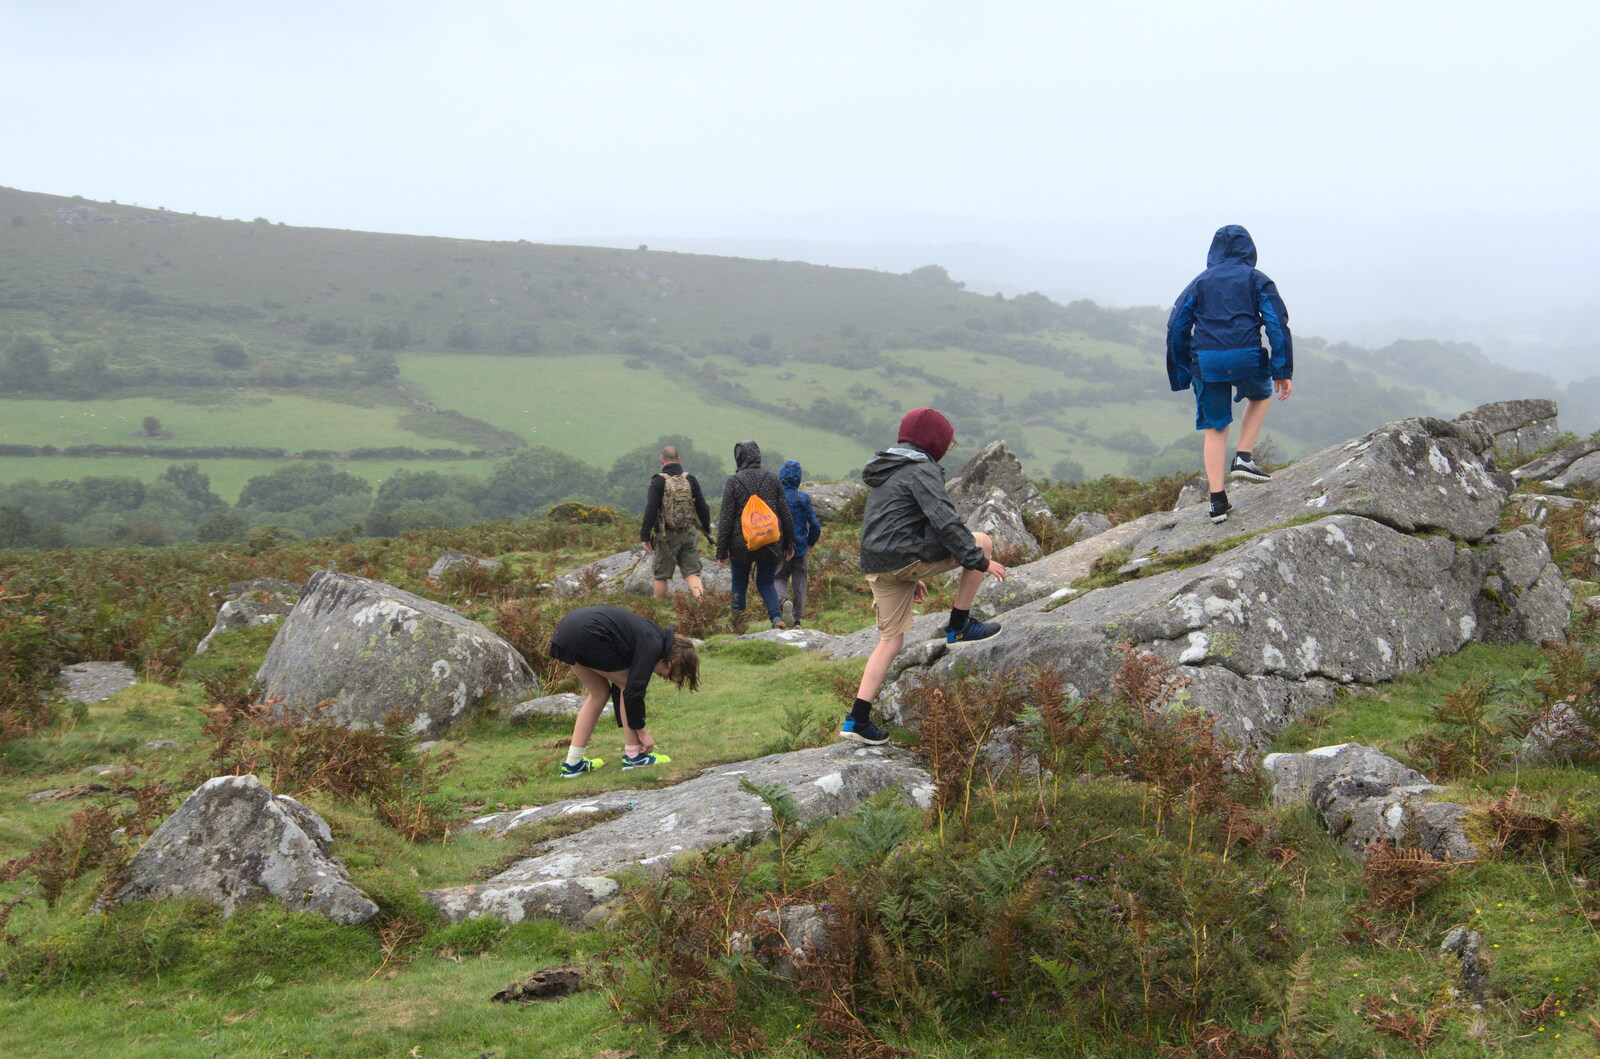 We head off around the back of the tor from A Walk up Hound Tor, Dartmoor, Devon - 24th August 2020